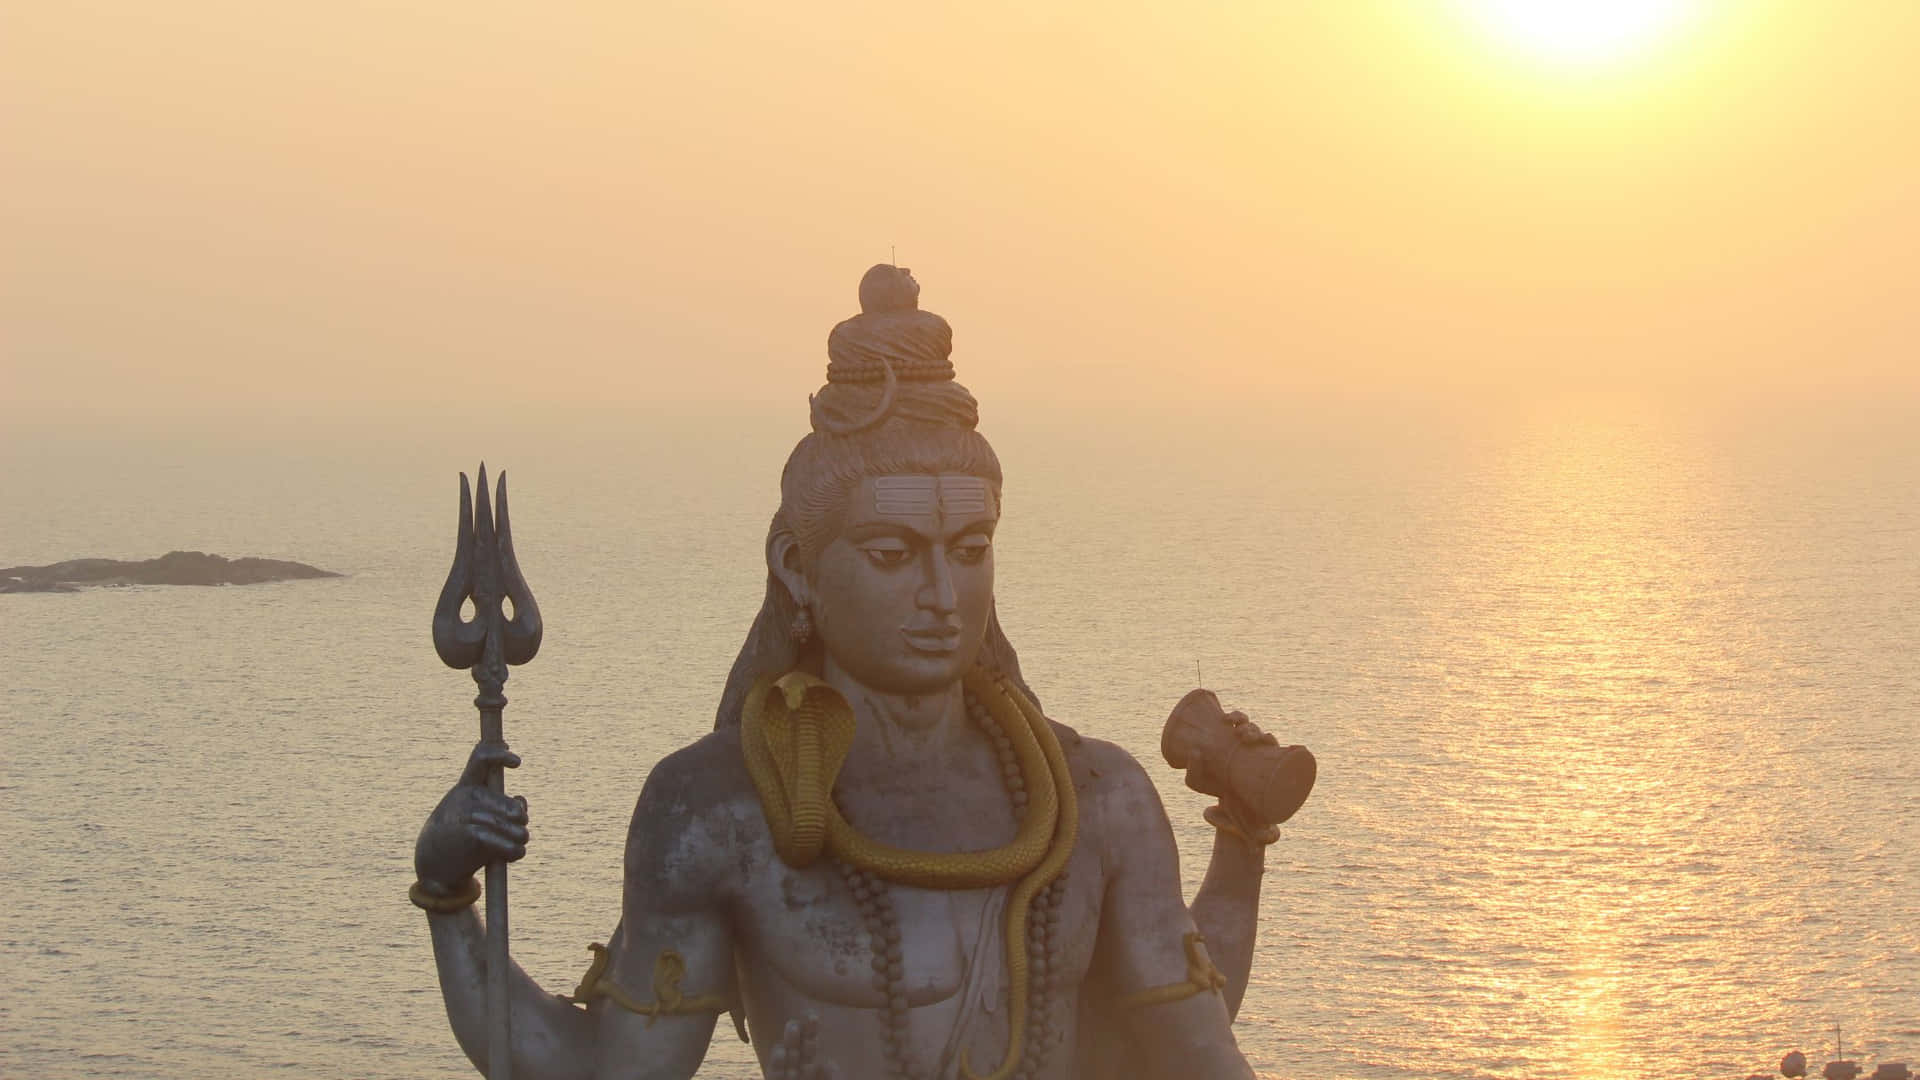 Download Lord Shiva - The Supreme Lord of the Universe | Wallpapers.com